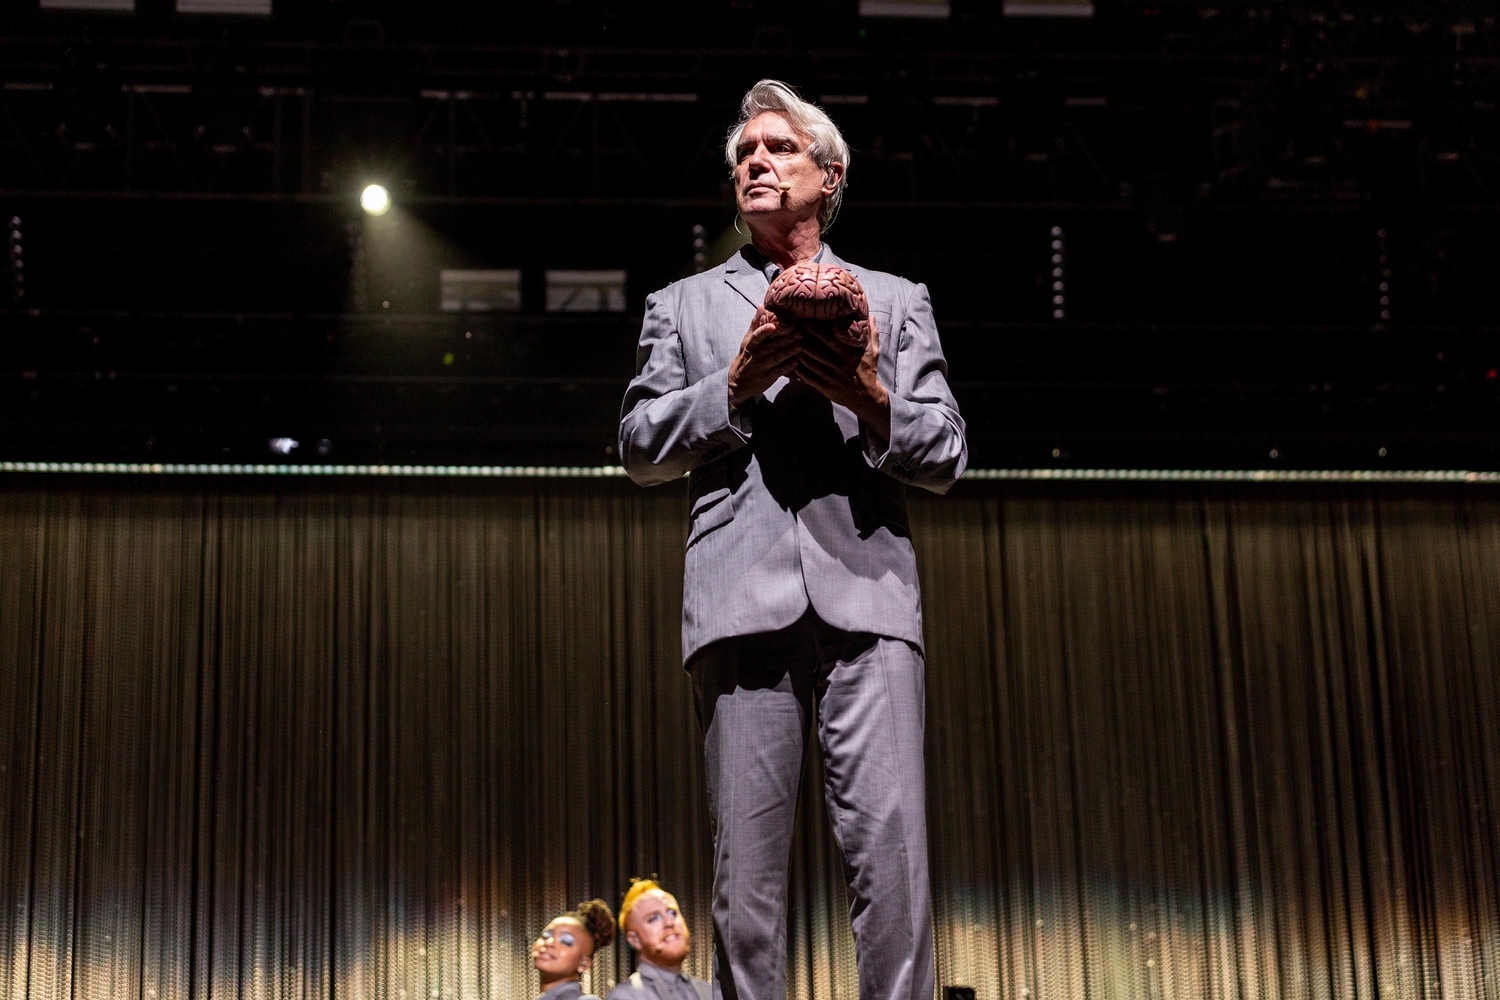 David Byrne, Depeche Mode and Young Fathers lead an eclectic day two at Open'er 2018